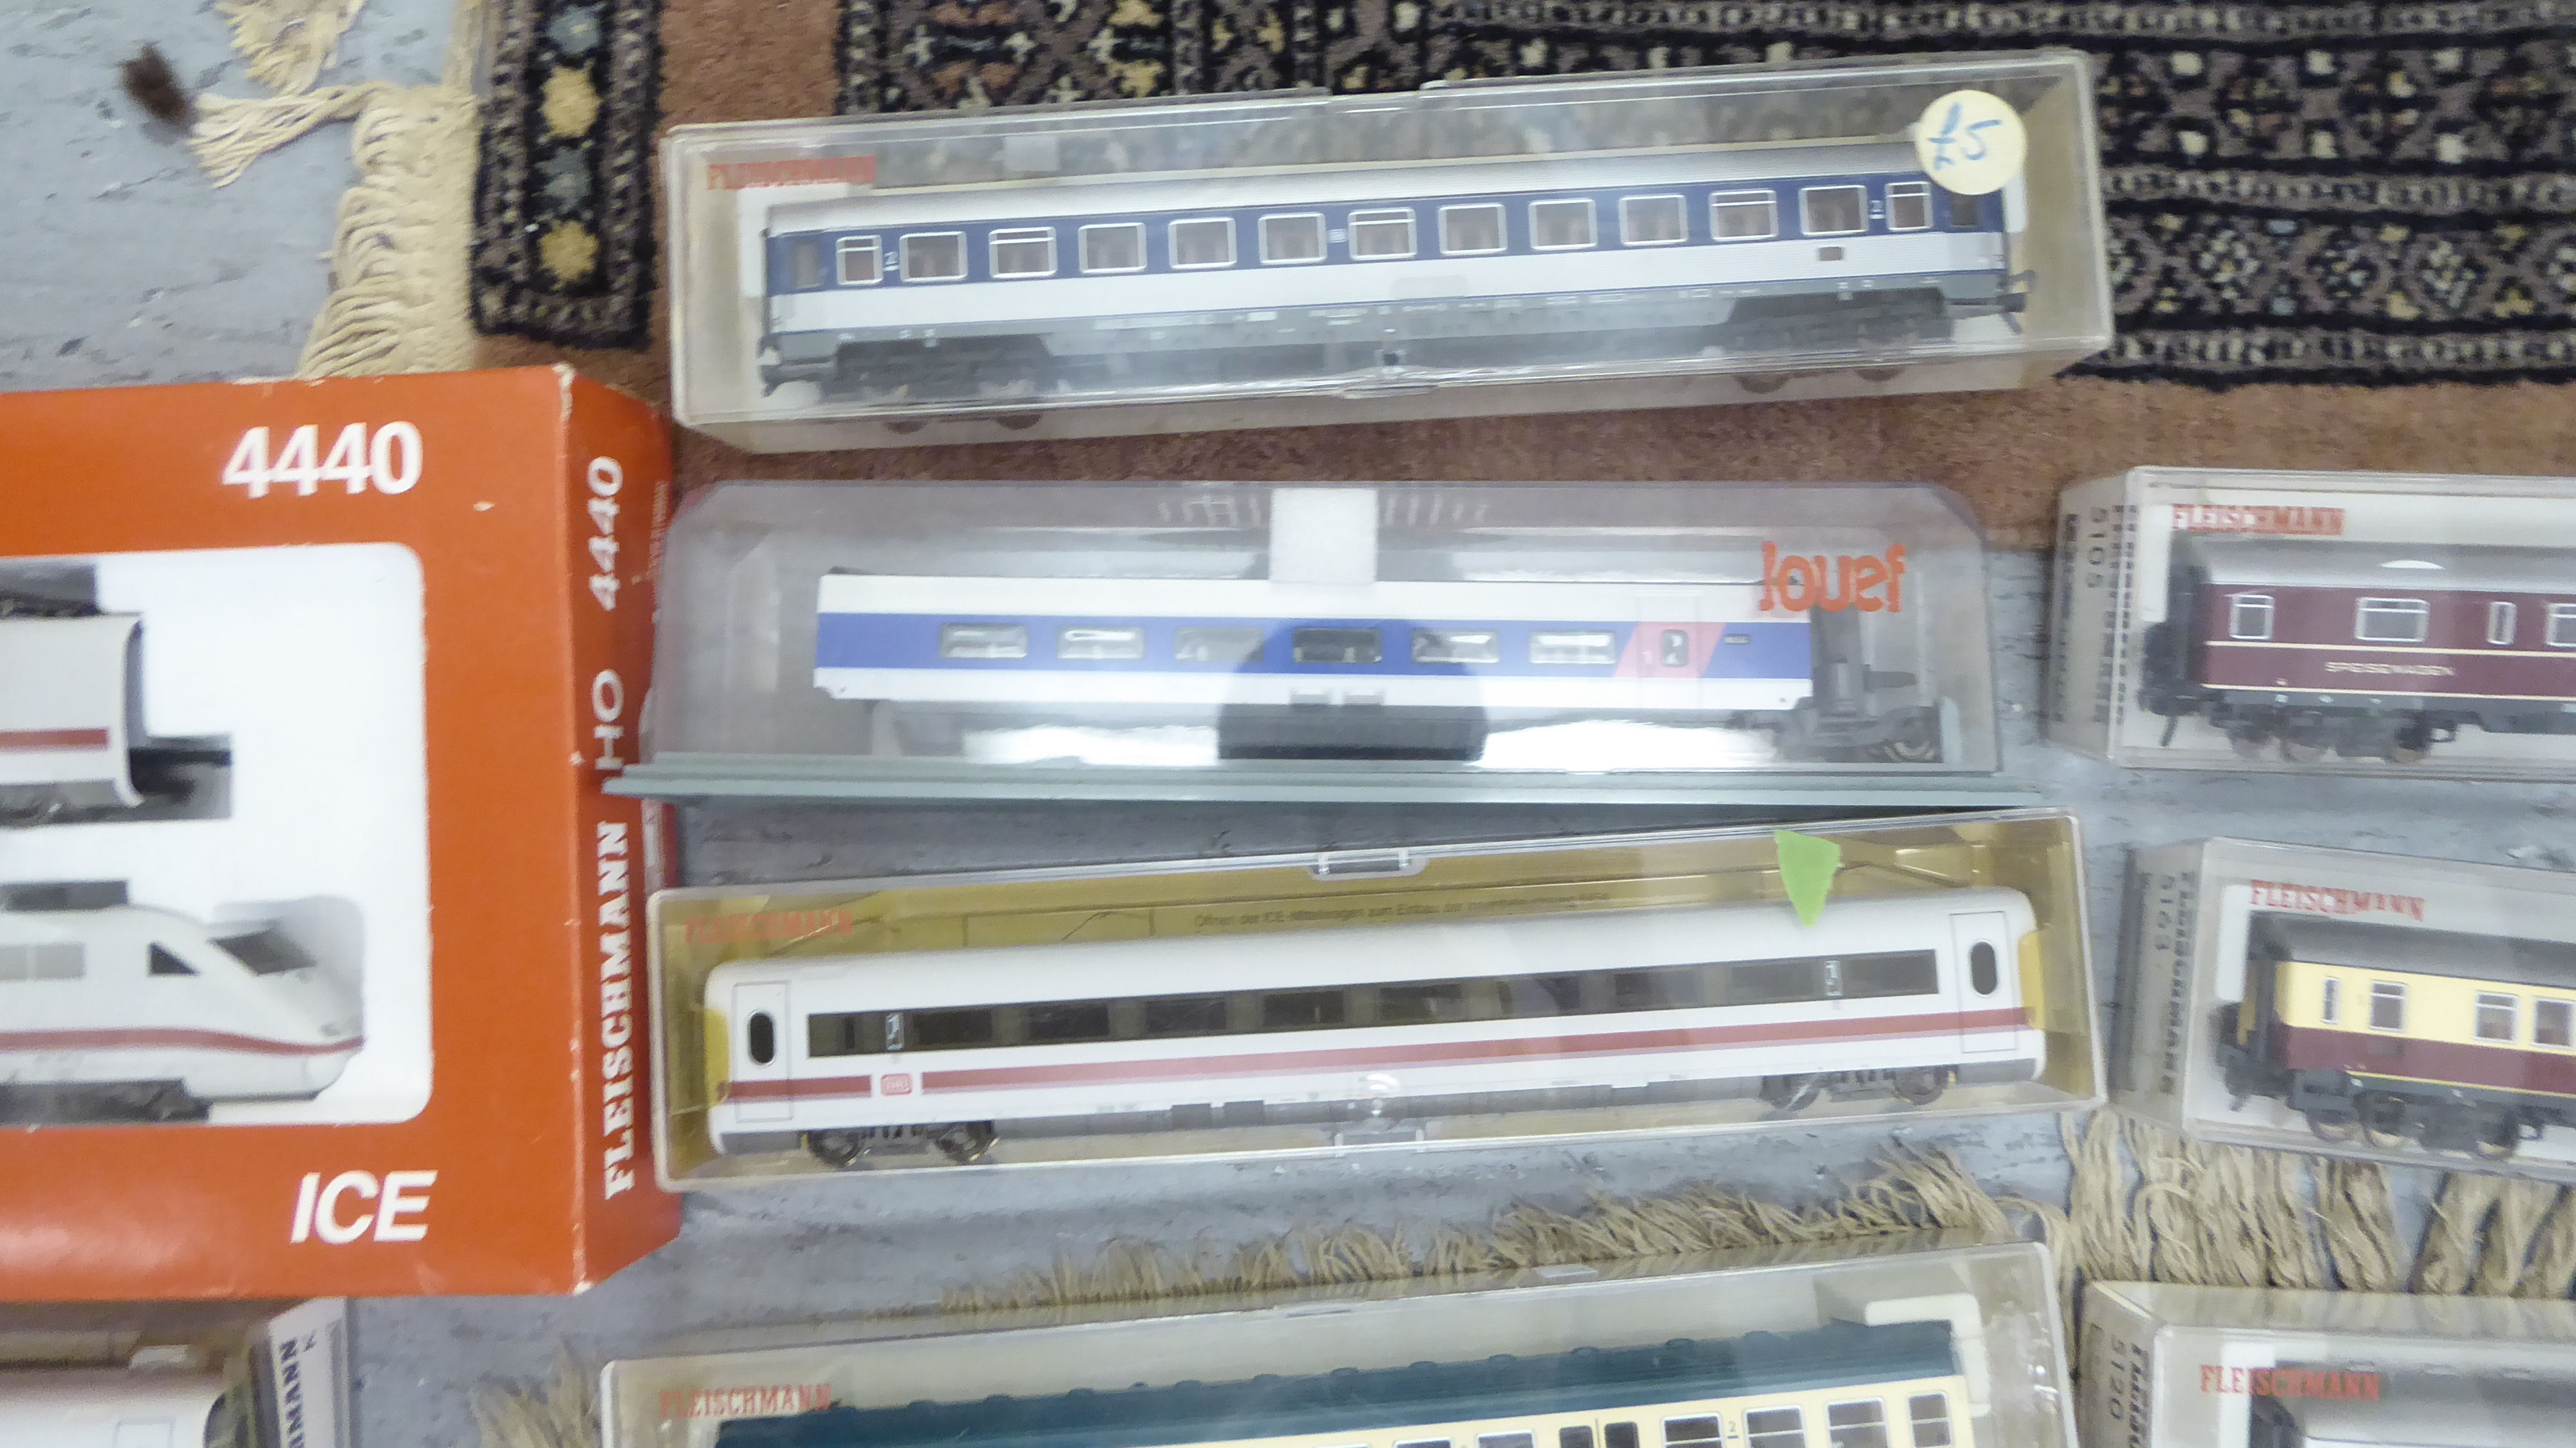 Fleischmann HO gauge model railway accessories: to include an Intercity Express and various coaches - Image 6 of 8